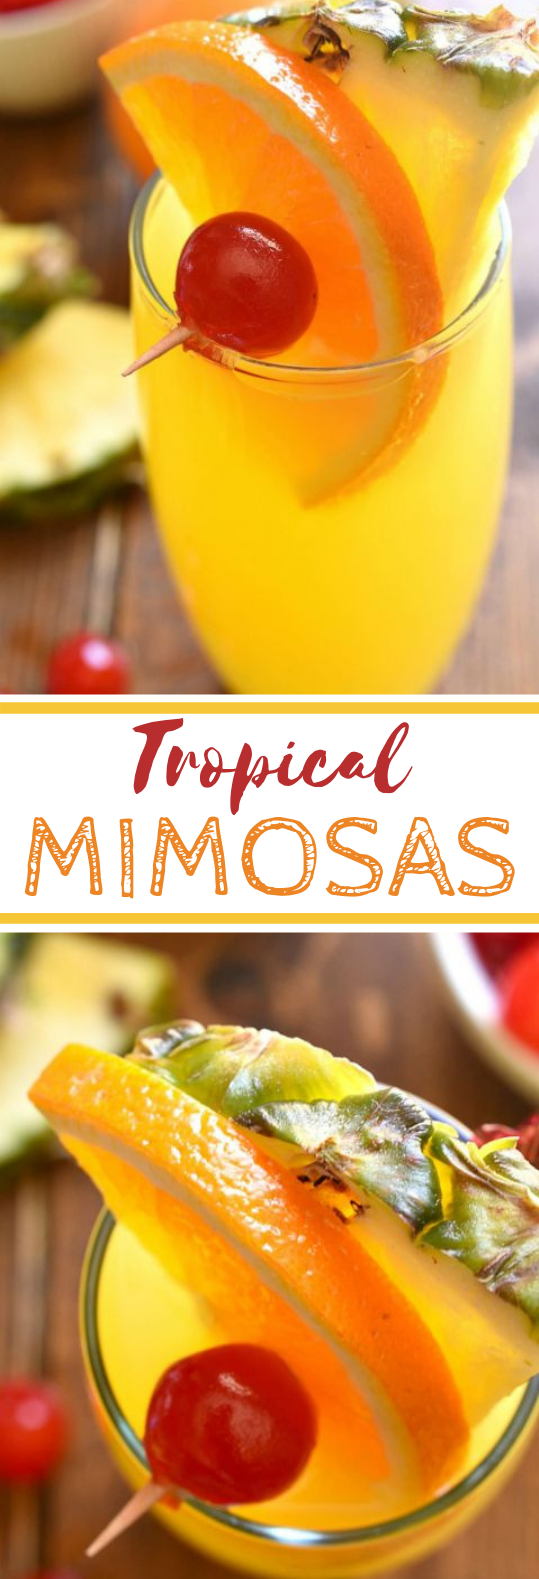 Tropical Mimosas #drink #cocktail